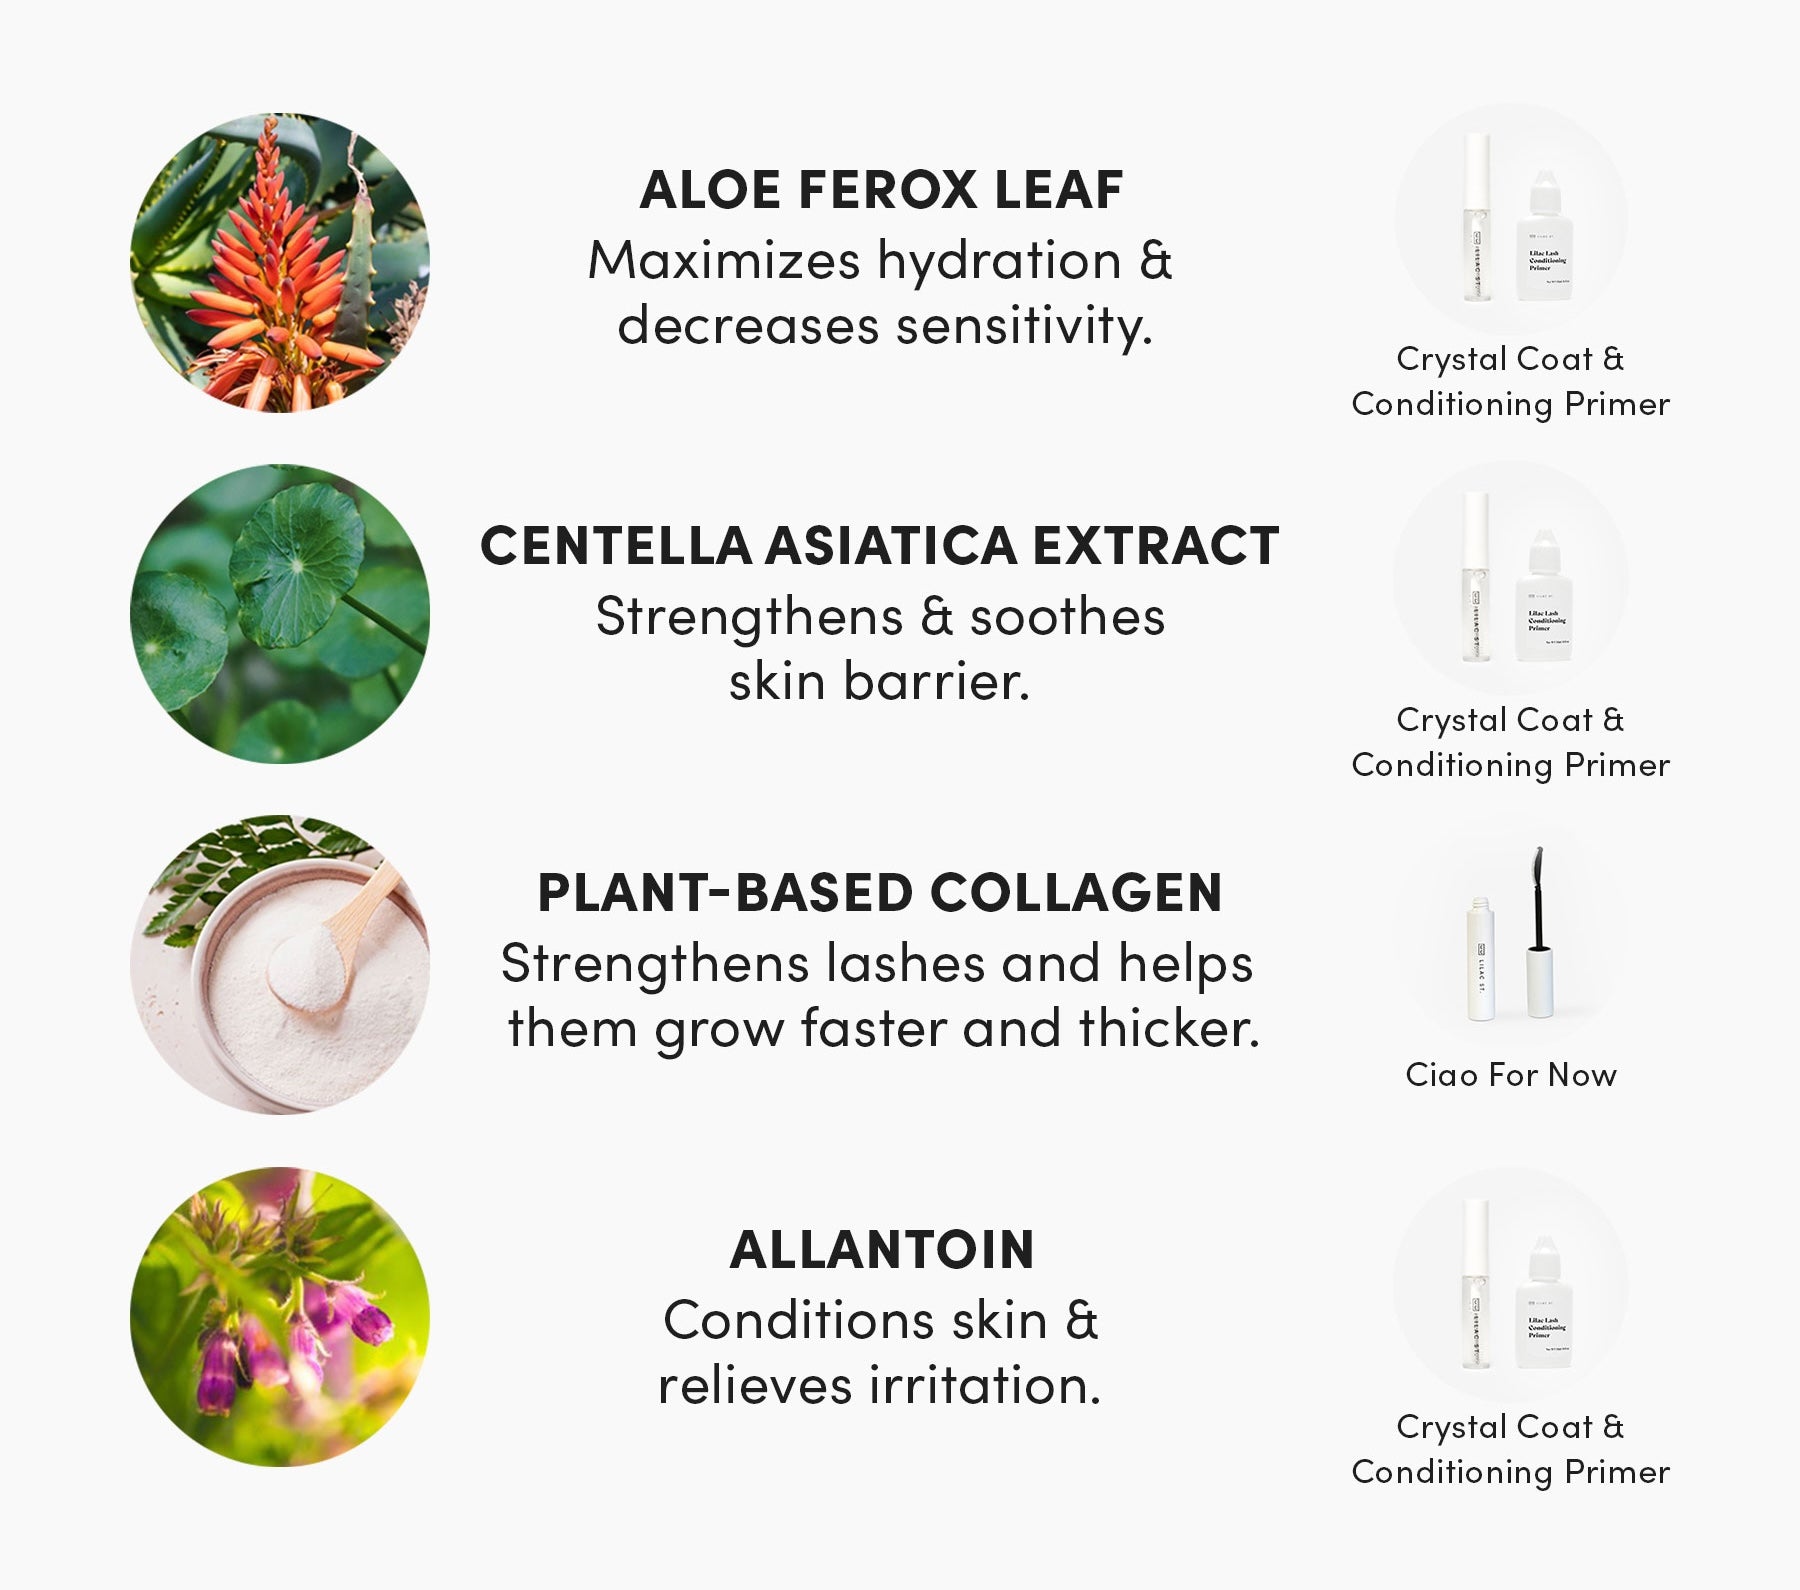 Aloe Ferox Leaf maximizes hydration and decreases sensitivity. Available in Crystal Coat and Conditioning Primer. Centella Asiatica Extract strengthens and soothes skin barrier. Available in Crystal Coat and Conditioning Primer. Plant-Based Collagen strengthens lashes and helps them grow faster and thicker. Available in Ciao for Now. Allantoin conditions skin and relieves irritation. Available in Crystal Coat and Conditioning Primer. 